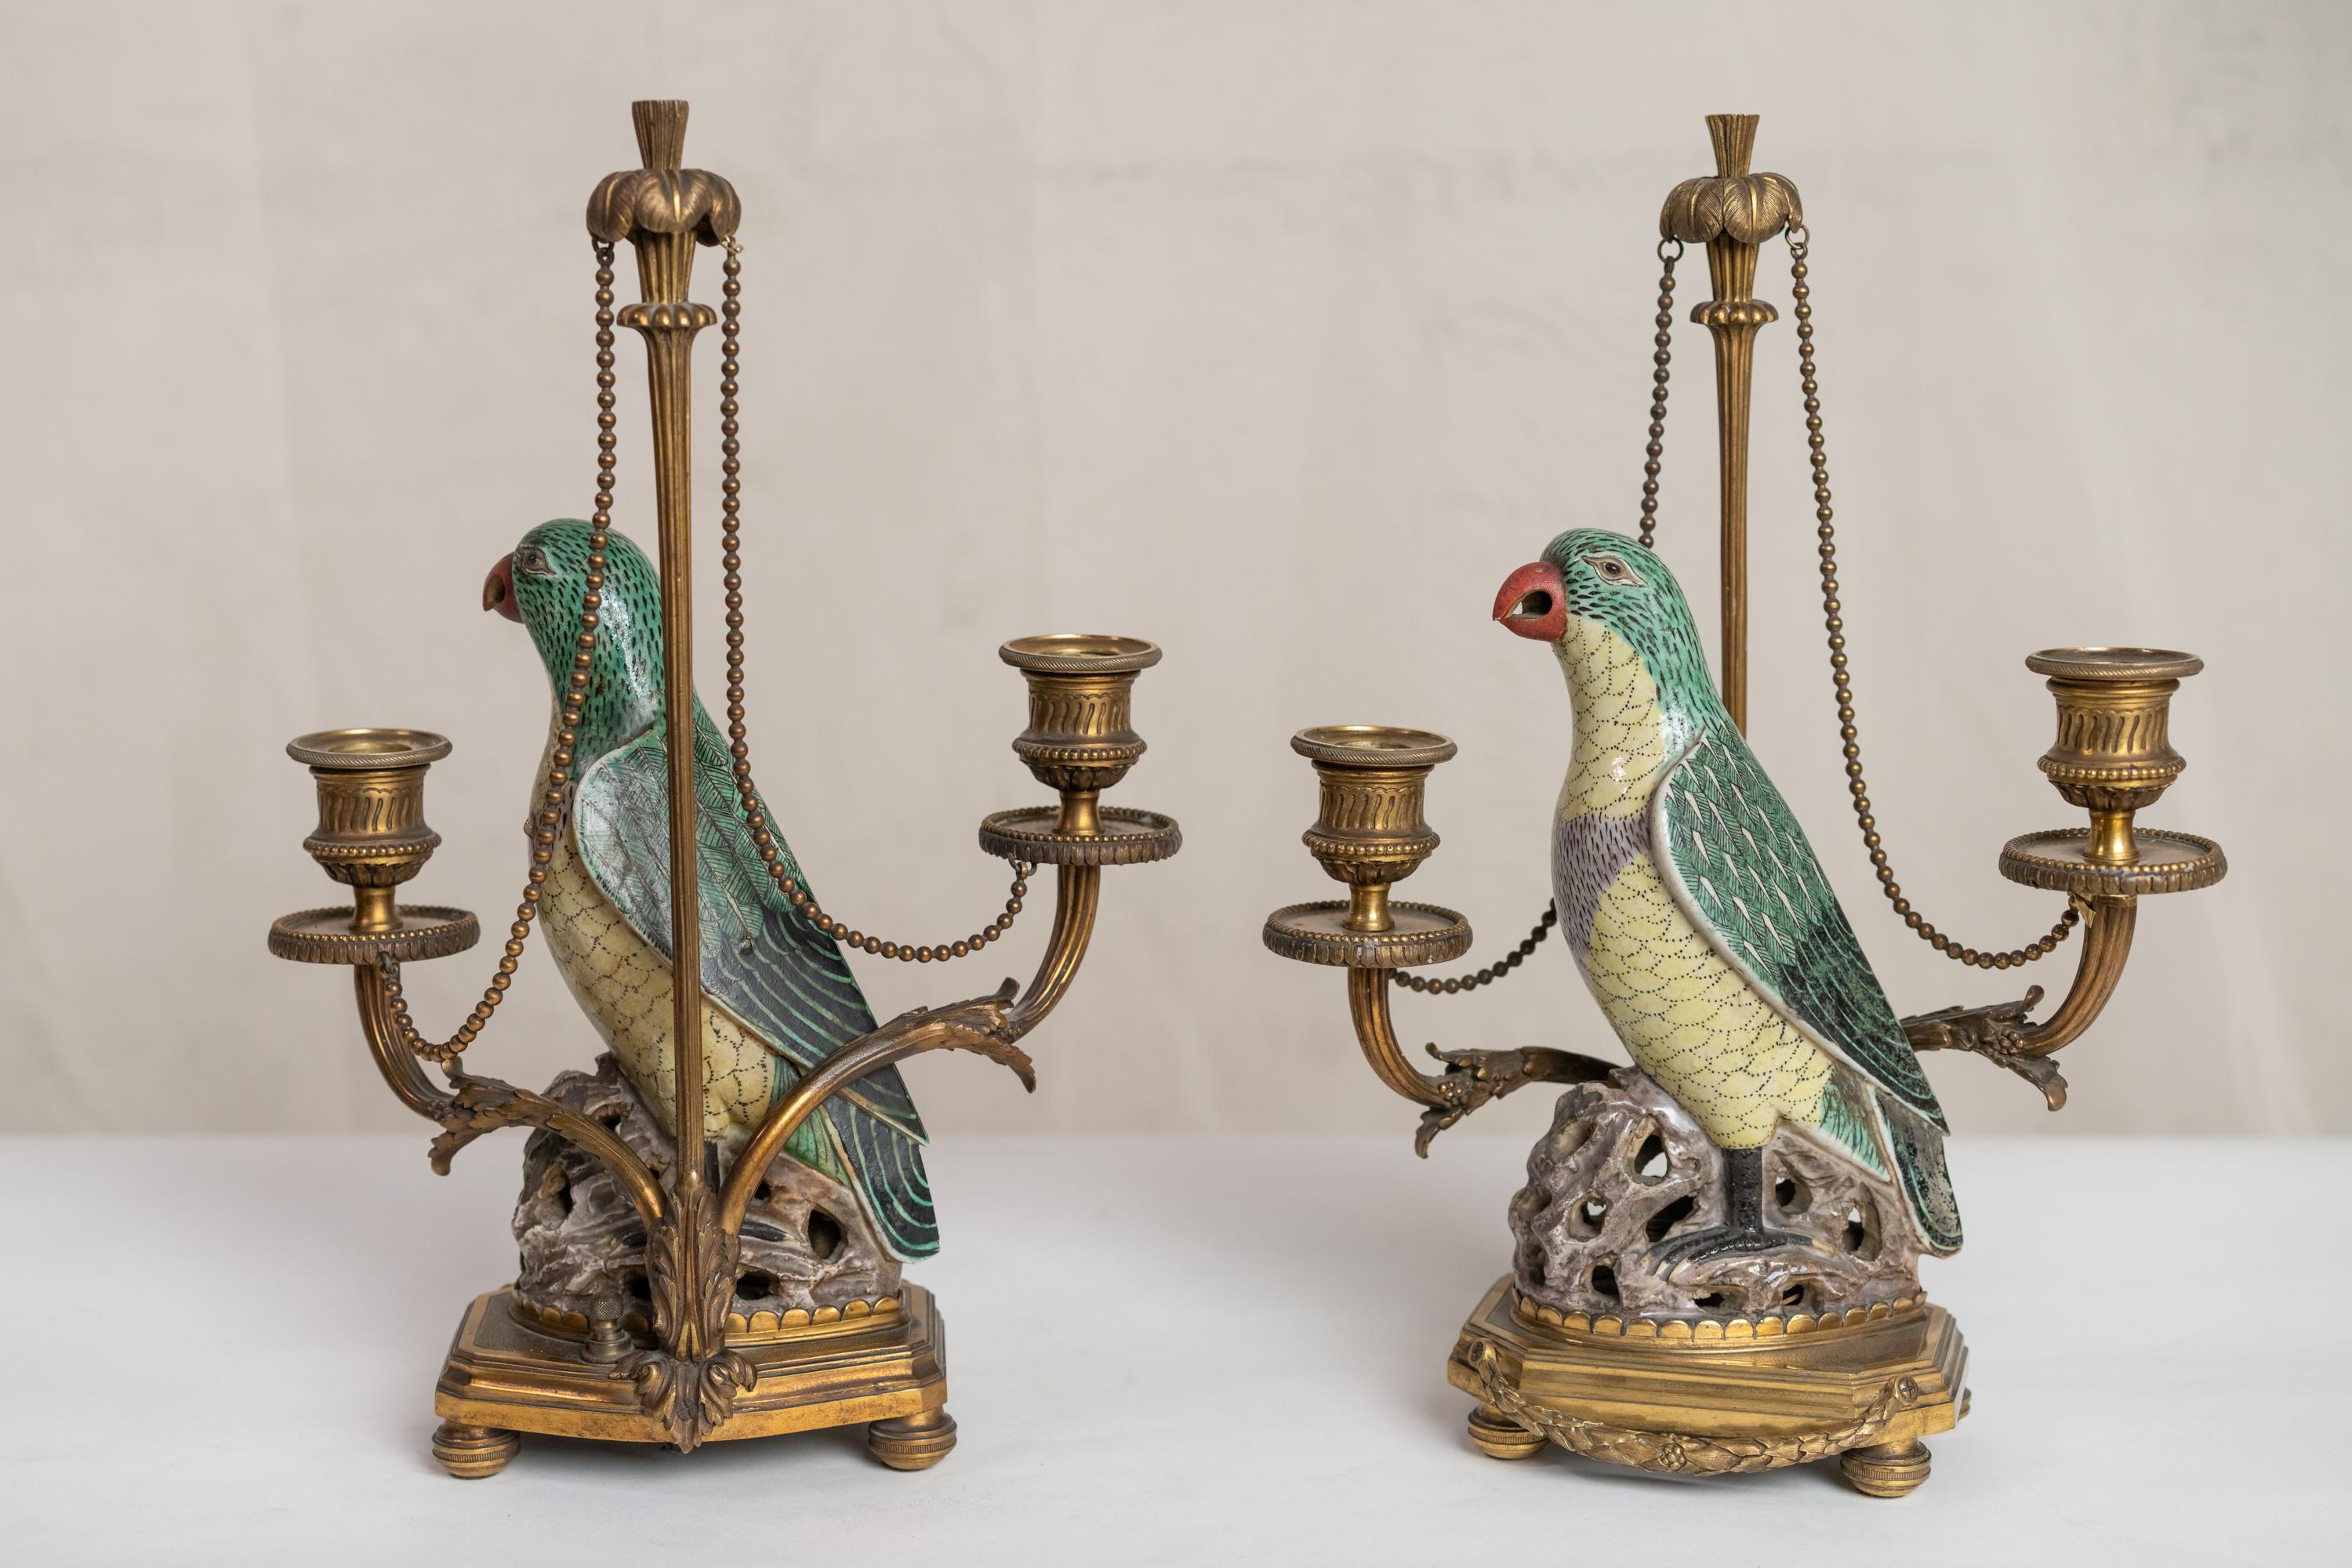 Chinese Export Rare Pair of 18th Century-19th Century Chinese Porcelain Parrots Candelabra For Sale